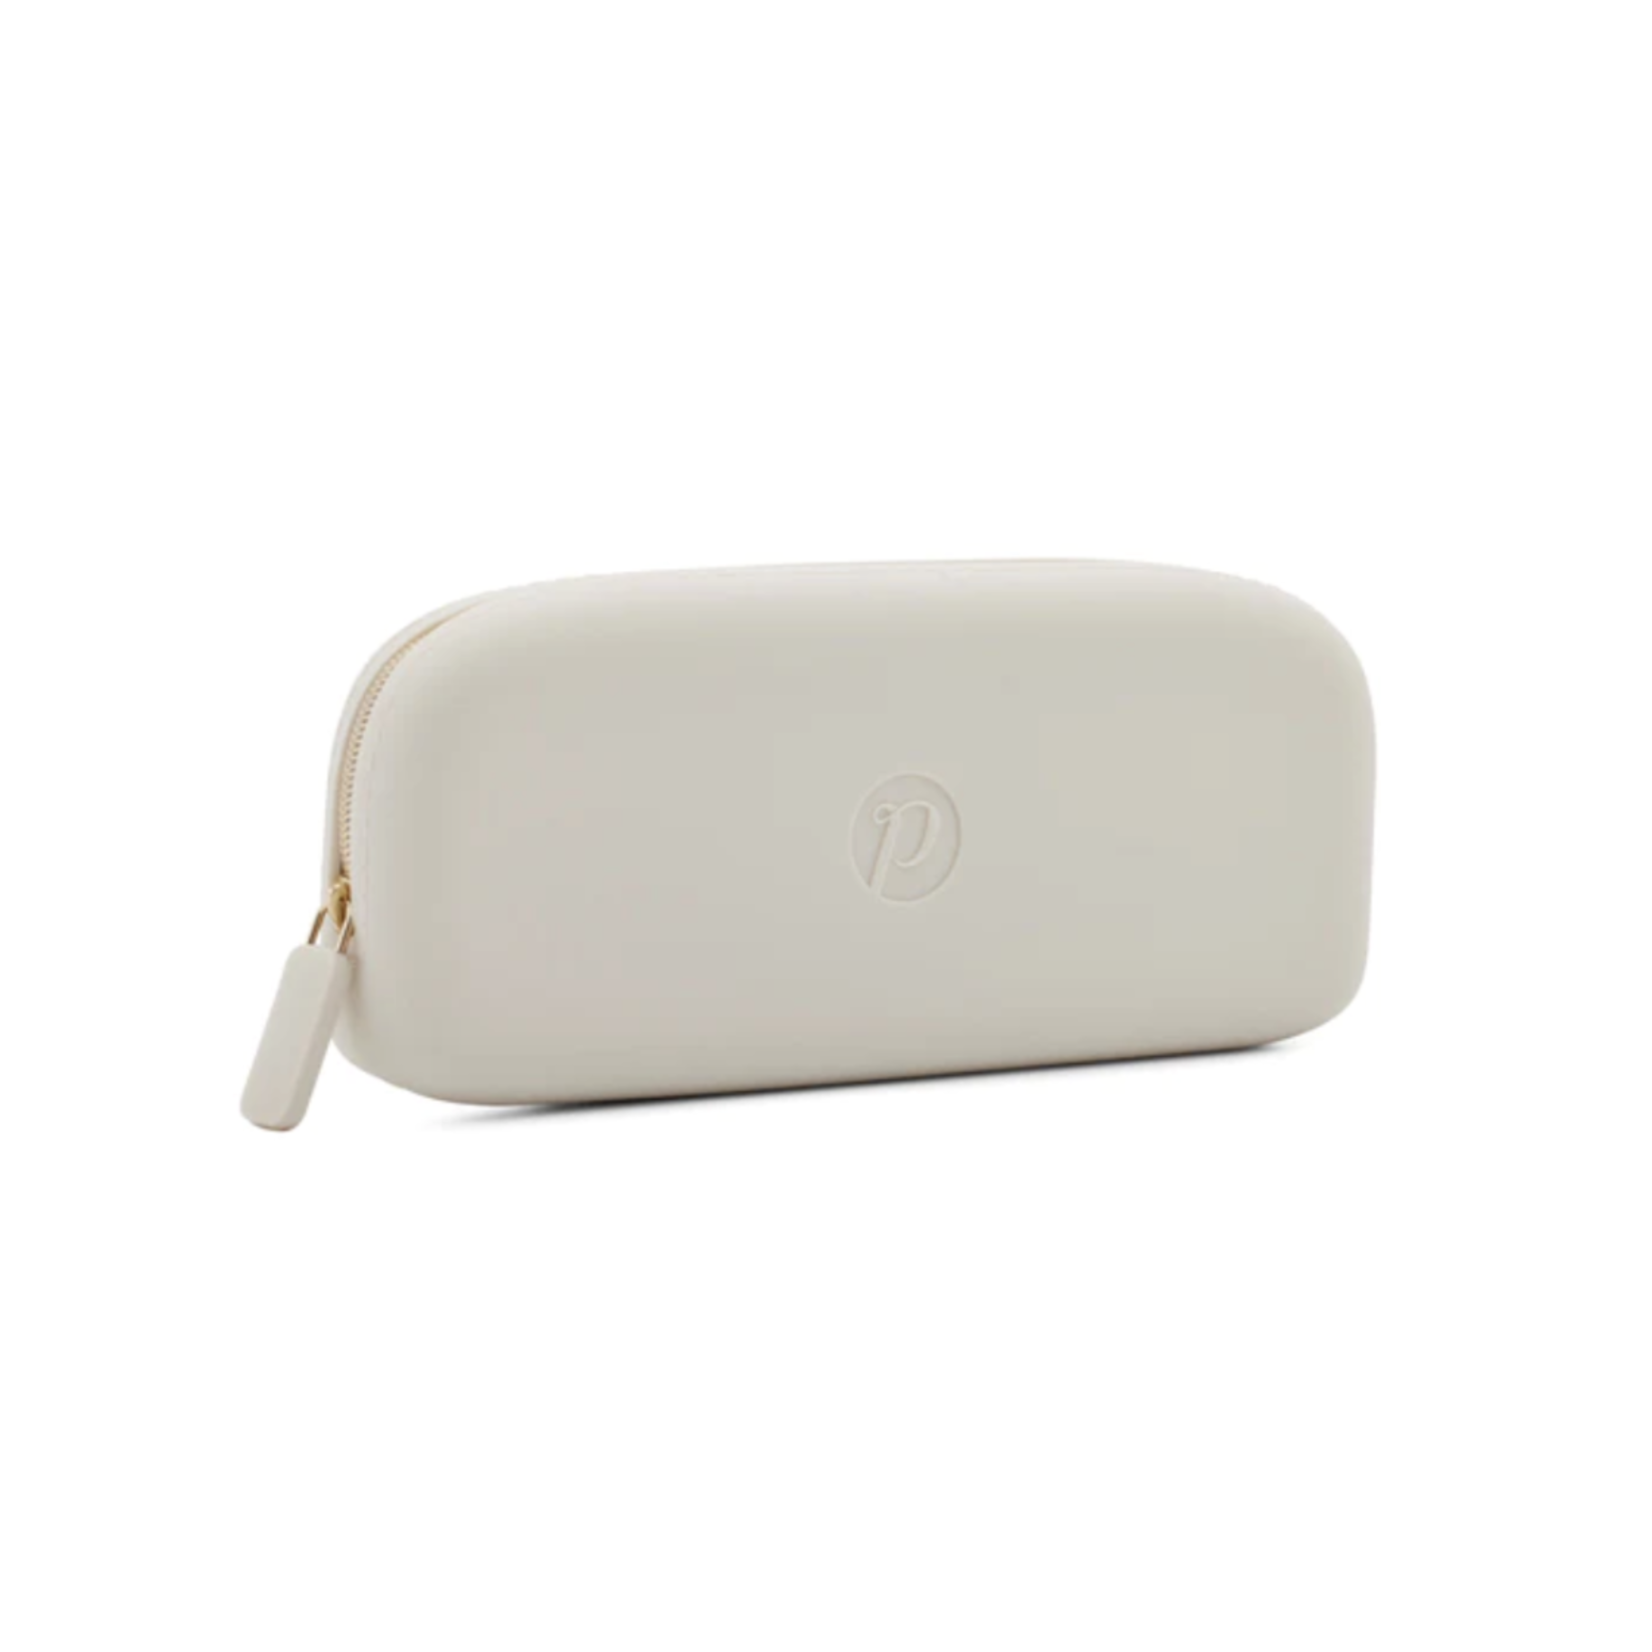 Peepers Peepers - Silicone Case - Cream